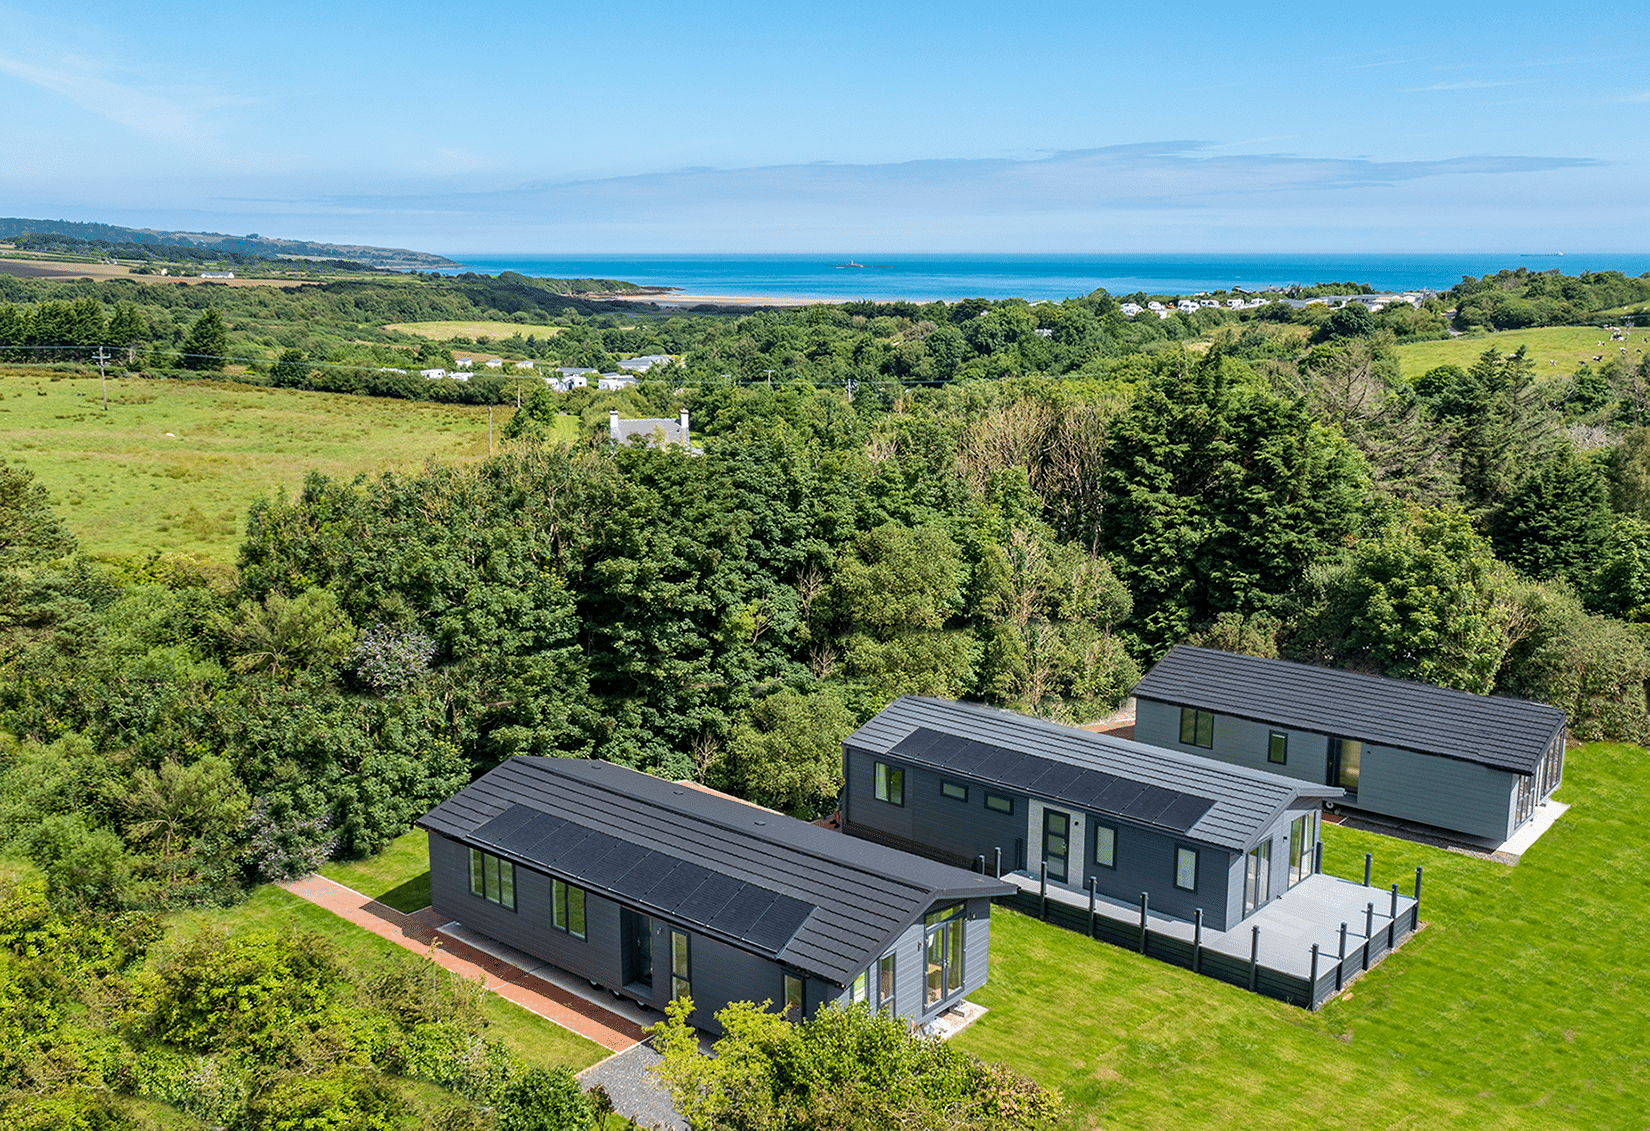 https://bulmerleisure.co.uk/wp-content/uploads/2021/07/DJI_0027-HDR-lodge-with-sea.png